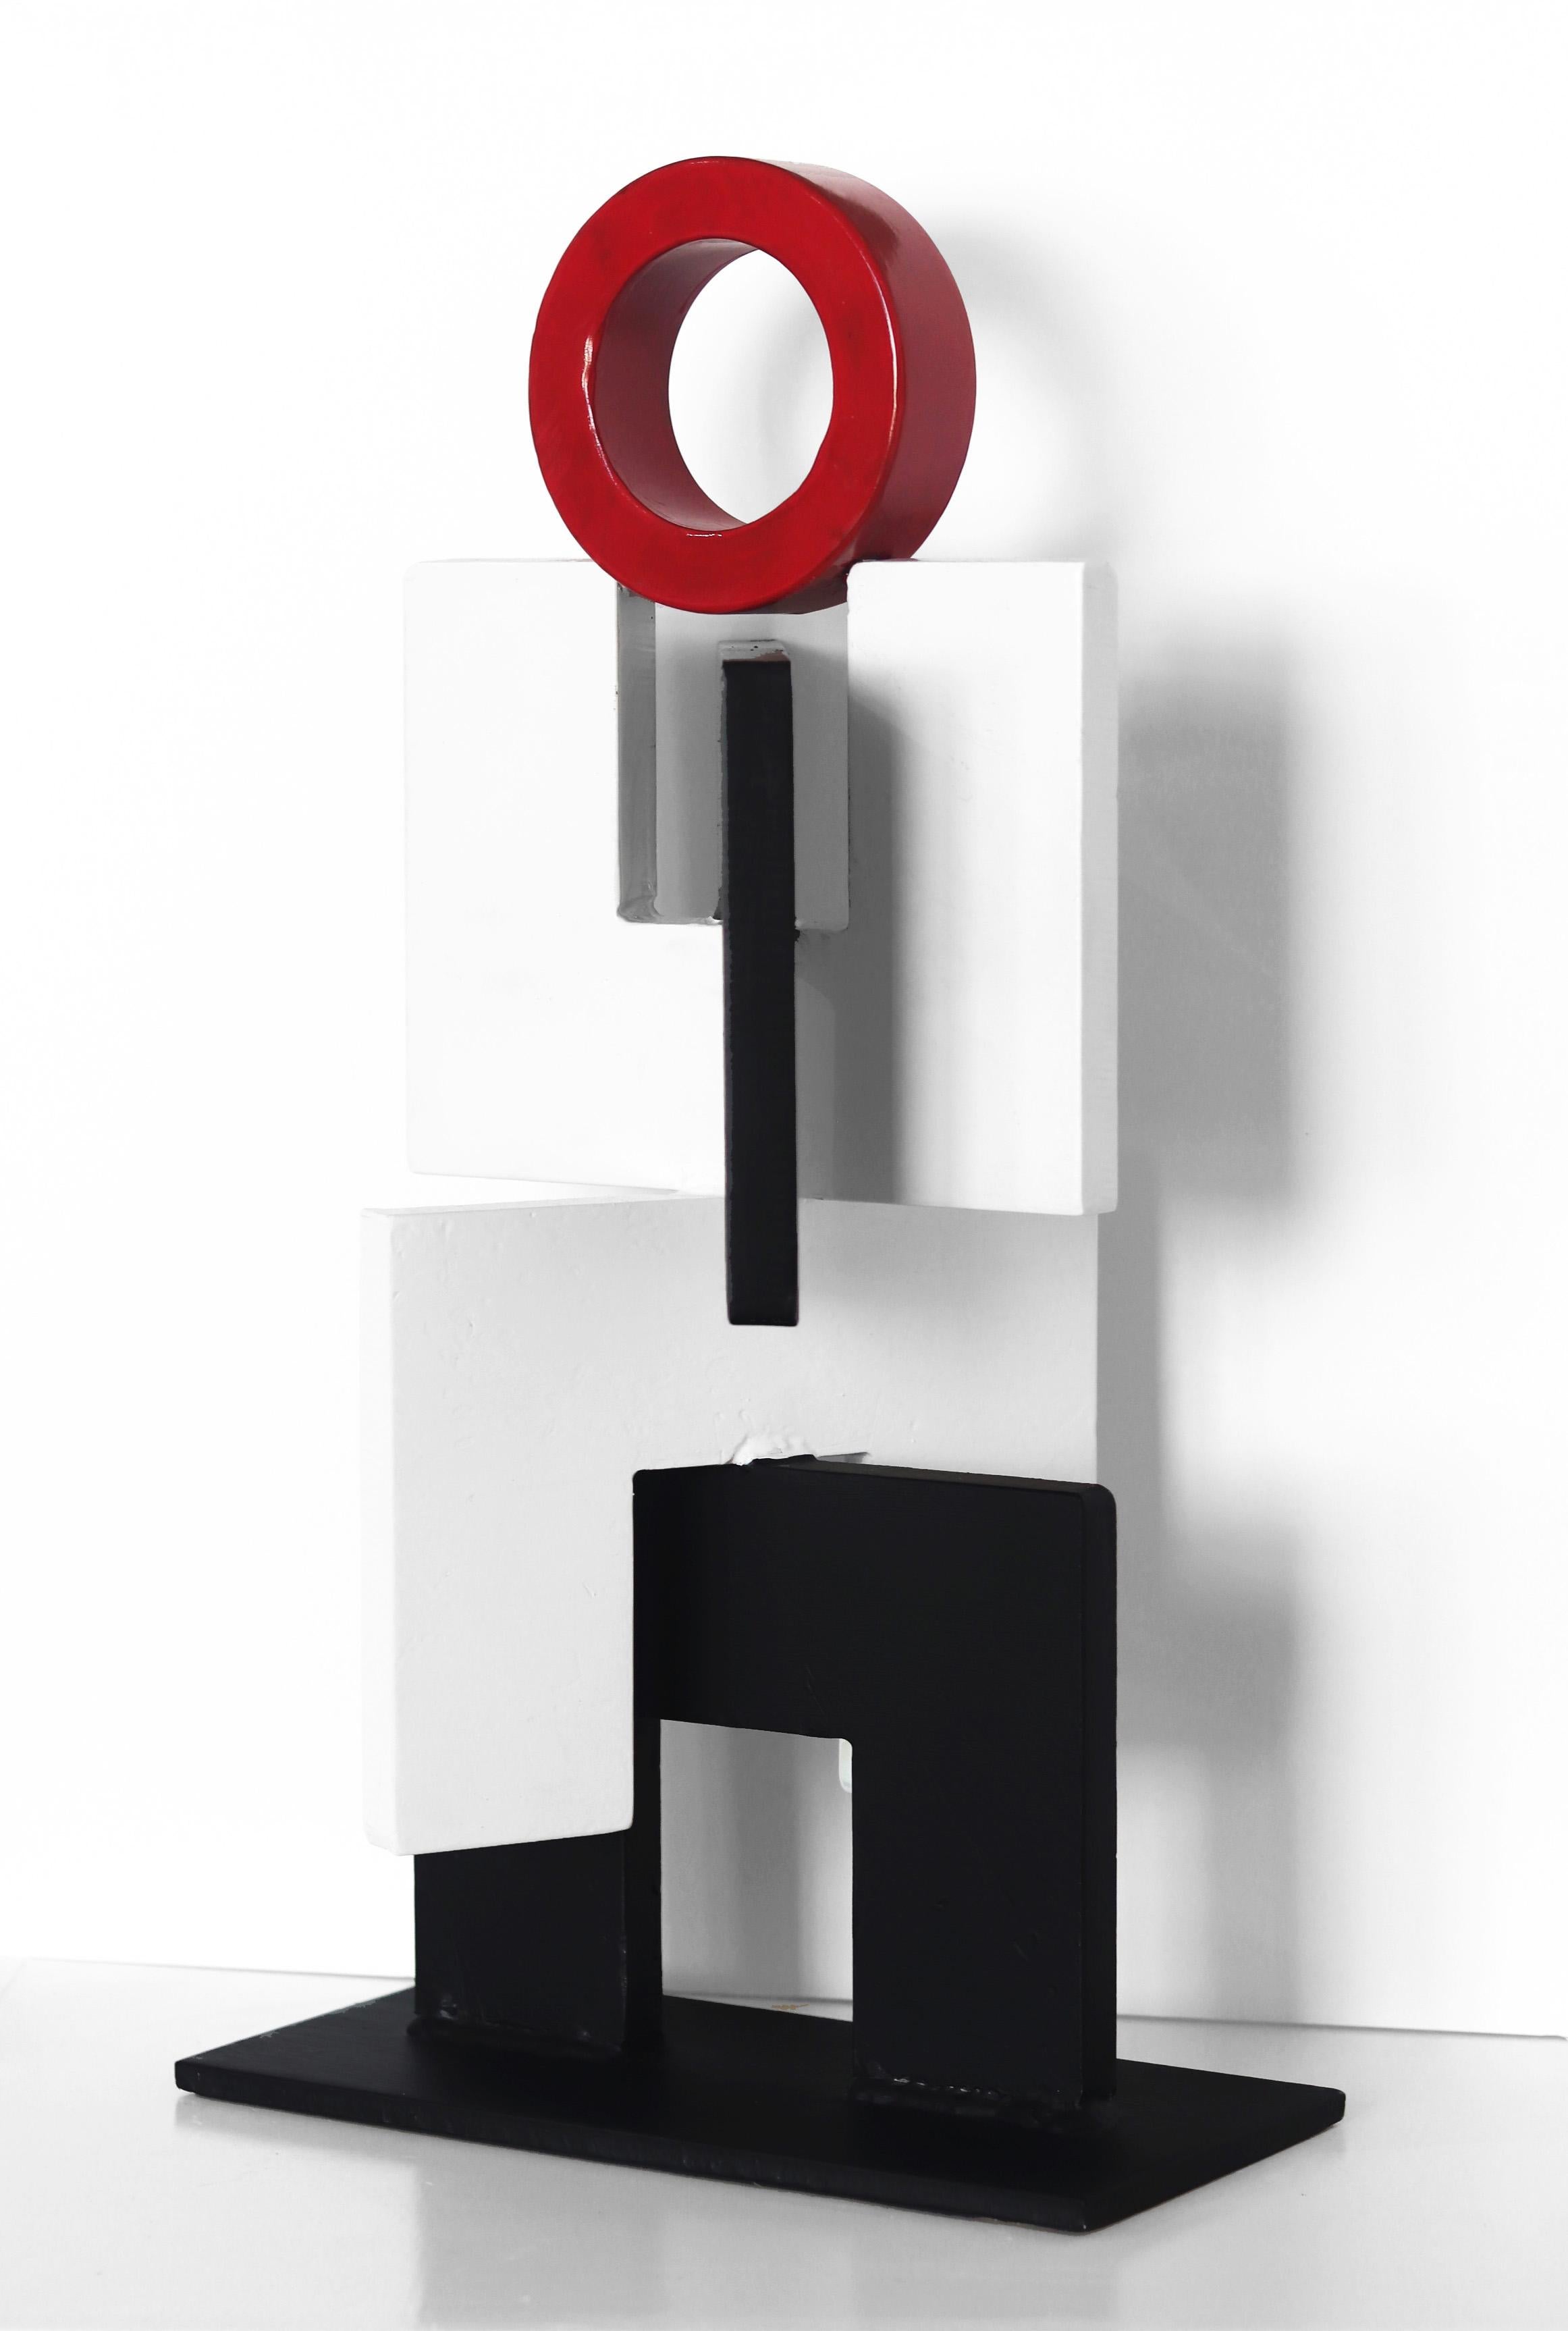 Red Head #3 - Black, White, and Red Figurative Industrial Metal Sculpture For Sale 1